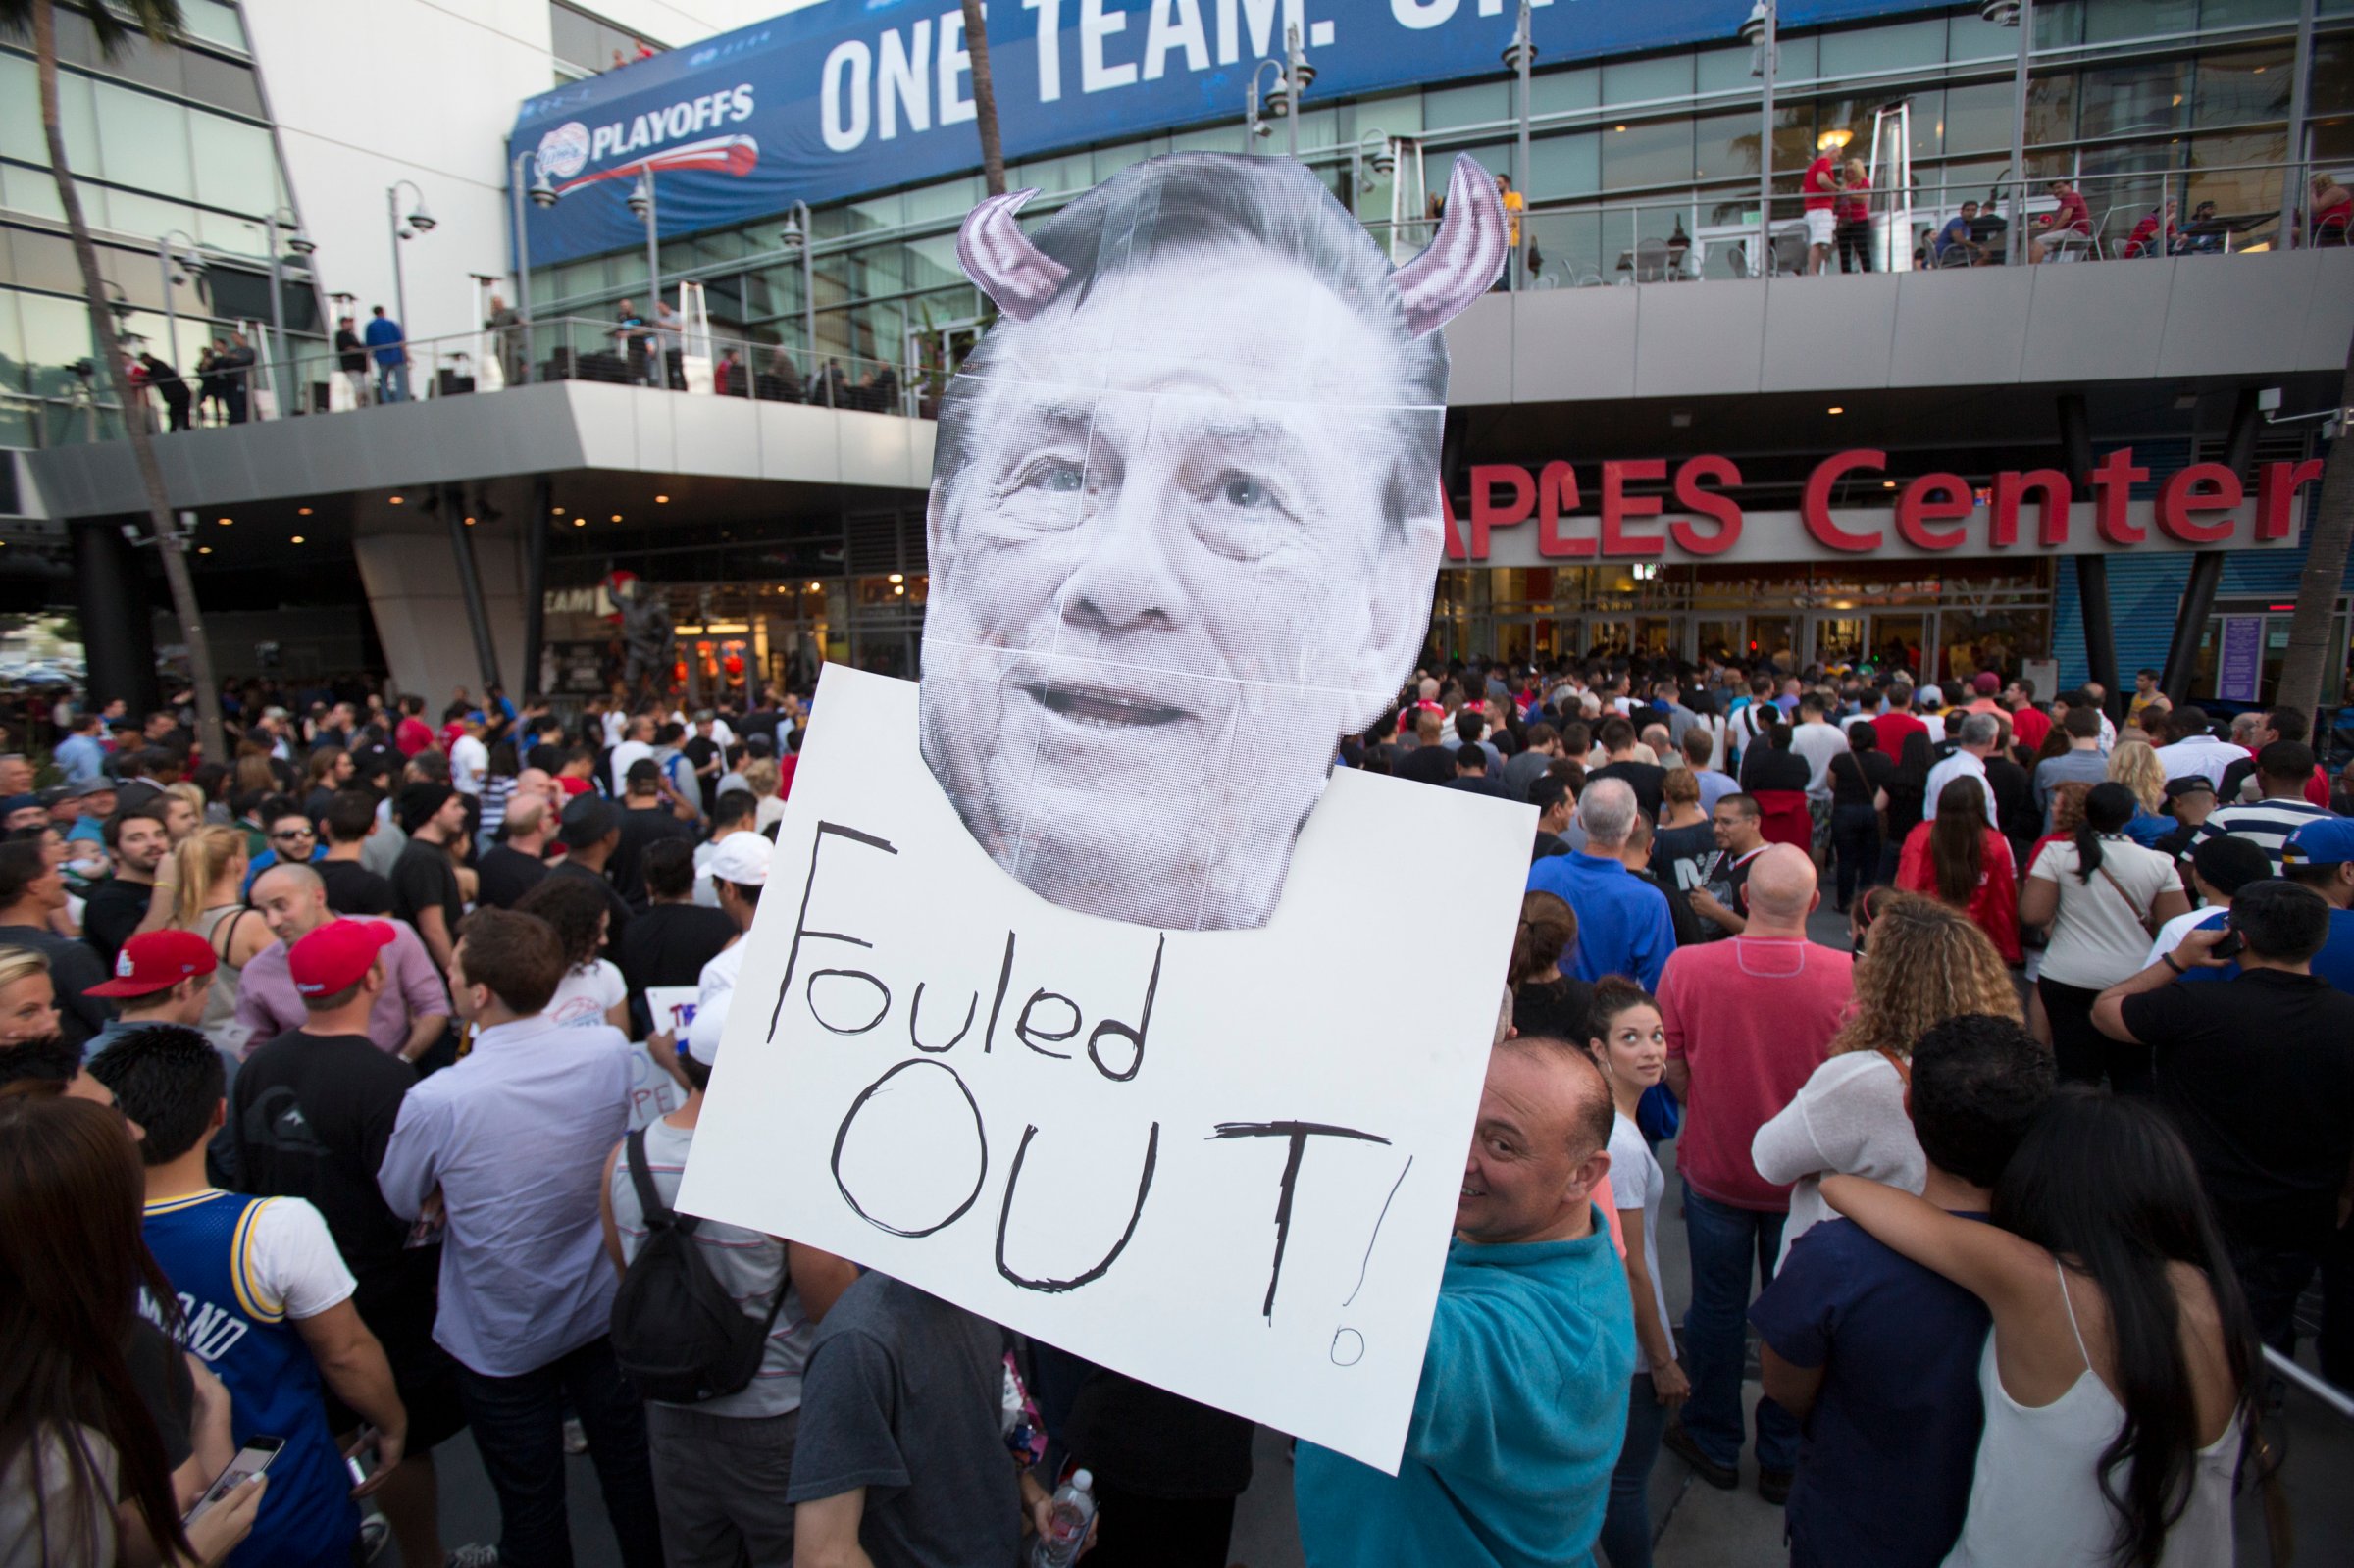 A supporter holds a photo cutout of Los Angeles Clippers owner Donald Sterling while standing in line for the NBA Playoff game 5 between Golden State Warriors and Los Angeles Clippers at Staples Center in Los Angeles